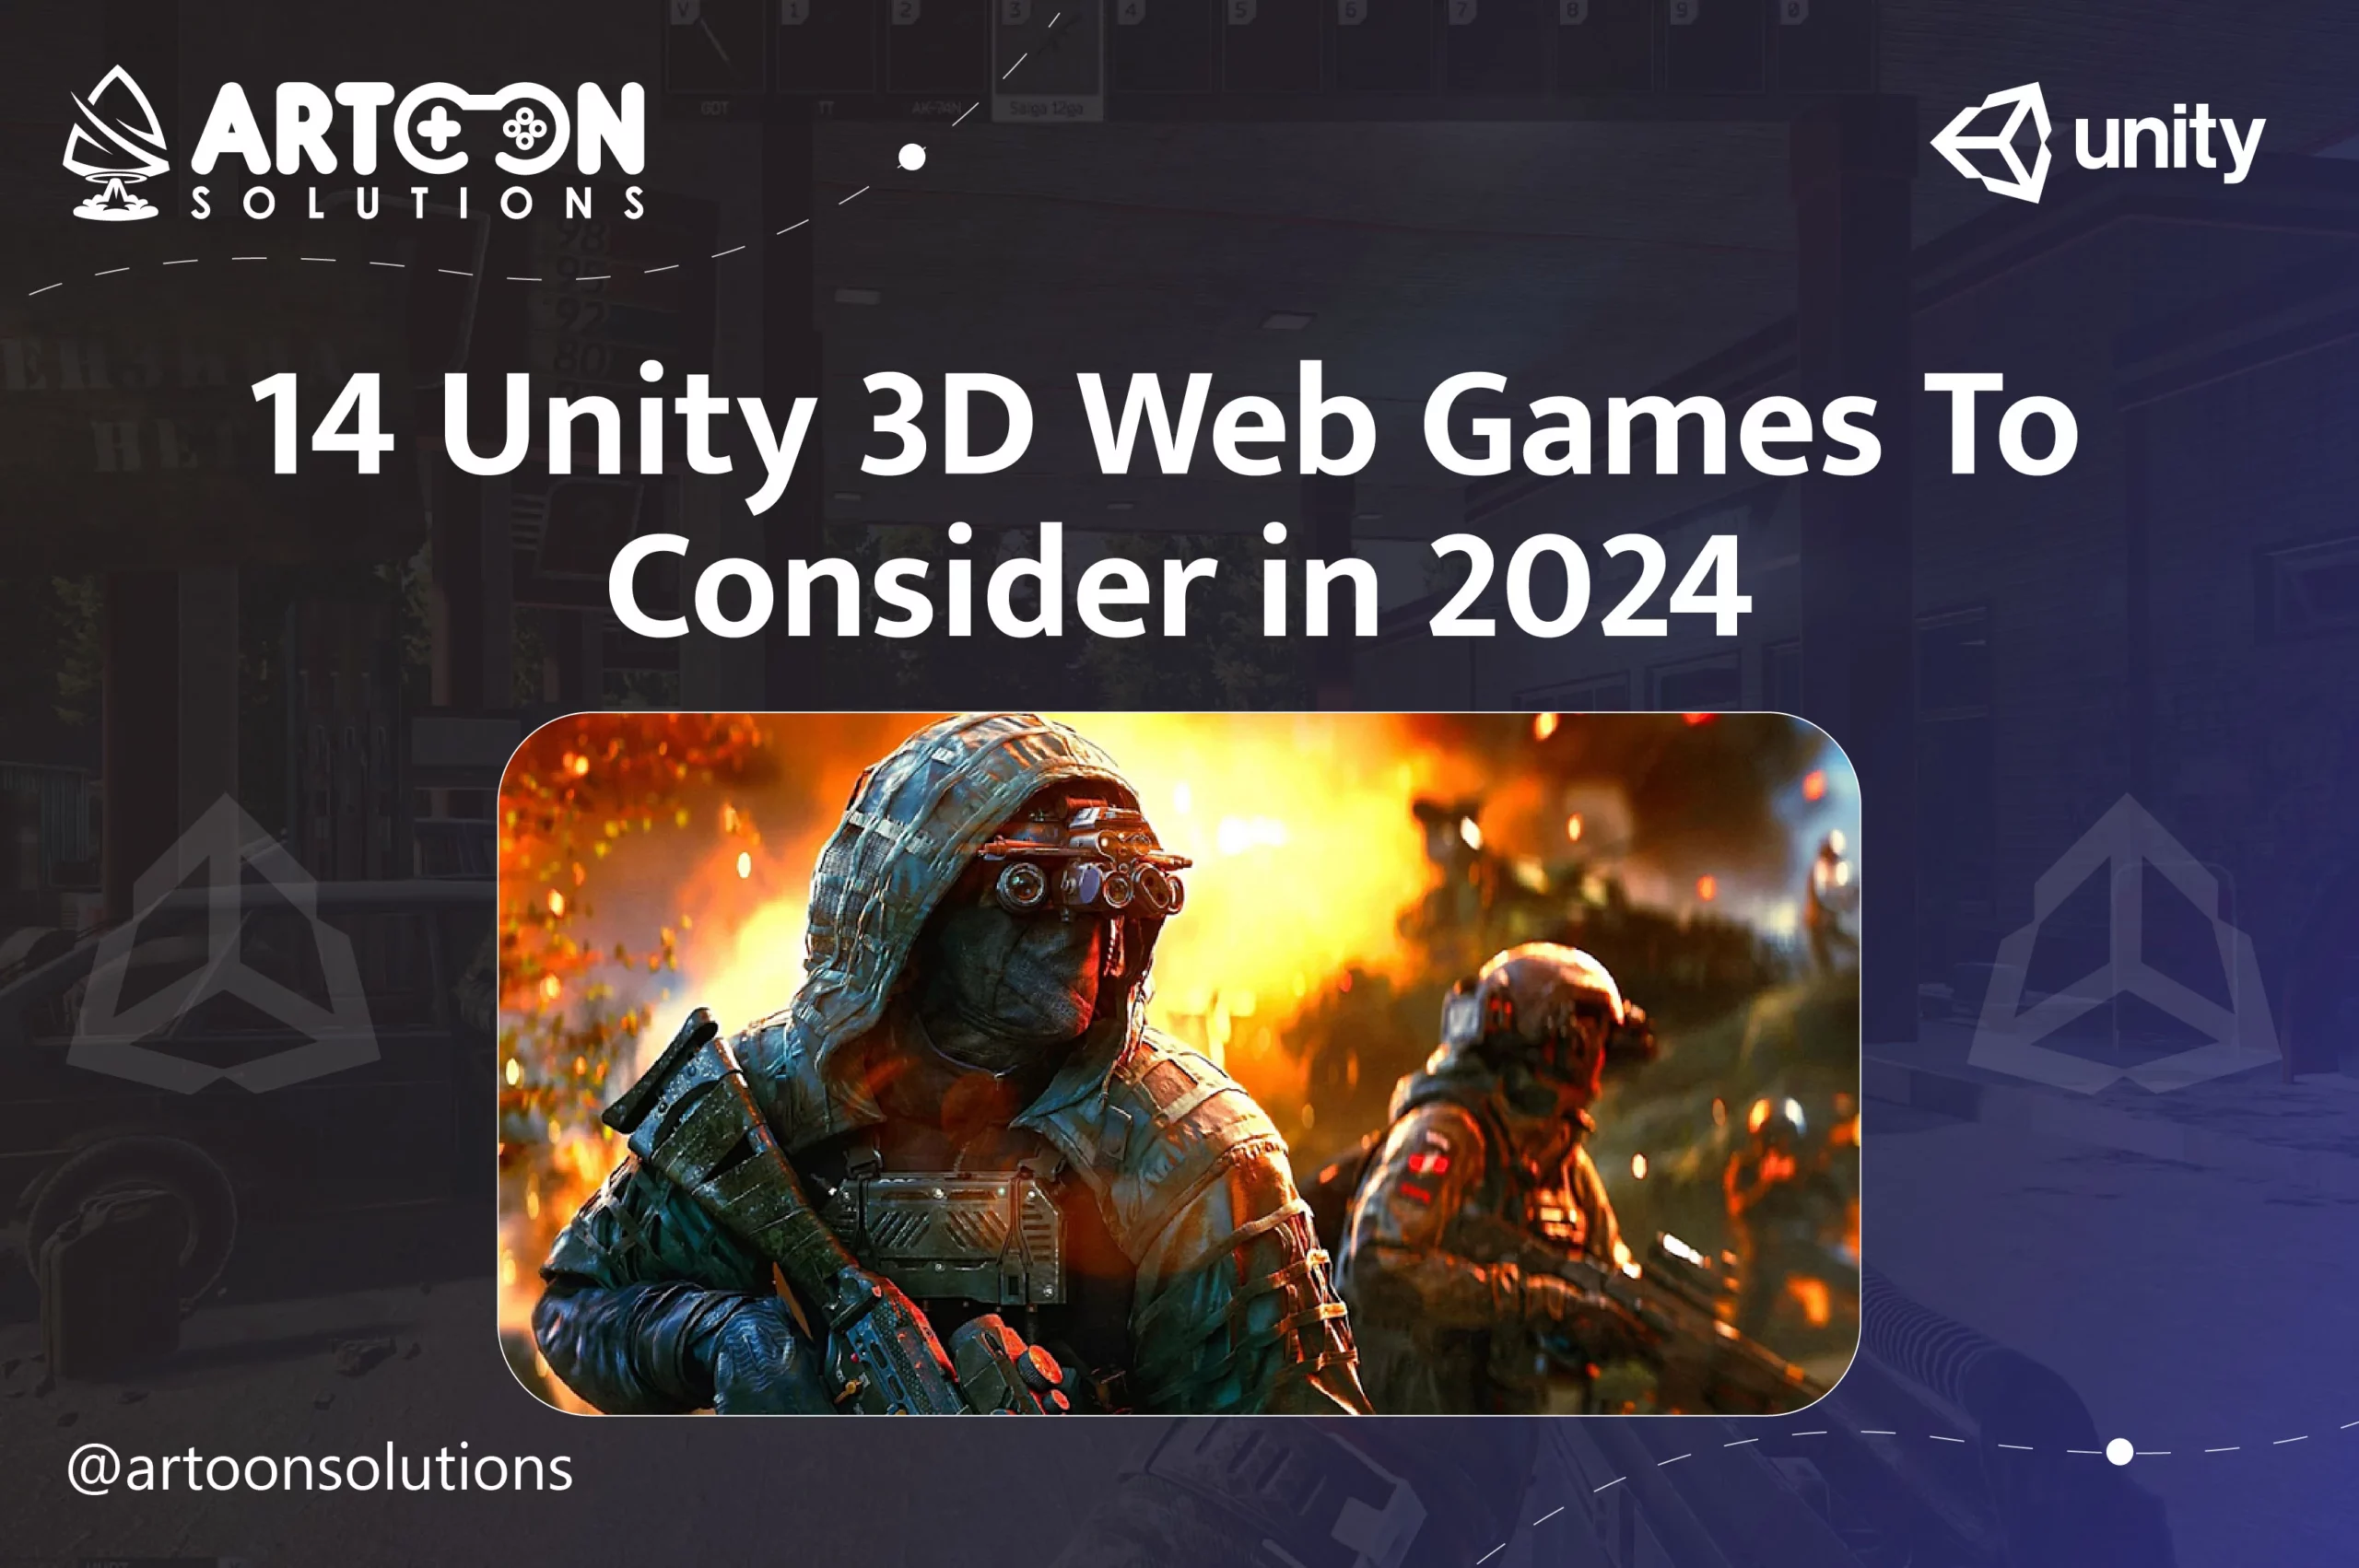 14 Unity 3D Web Games To Consider in 2024